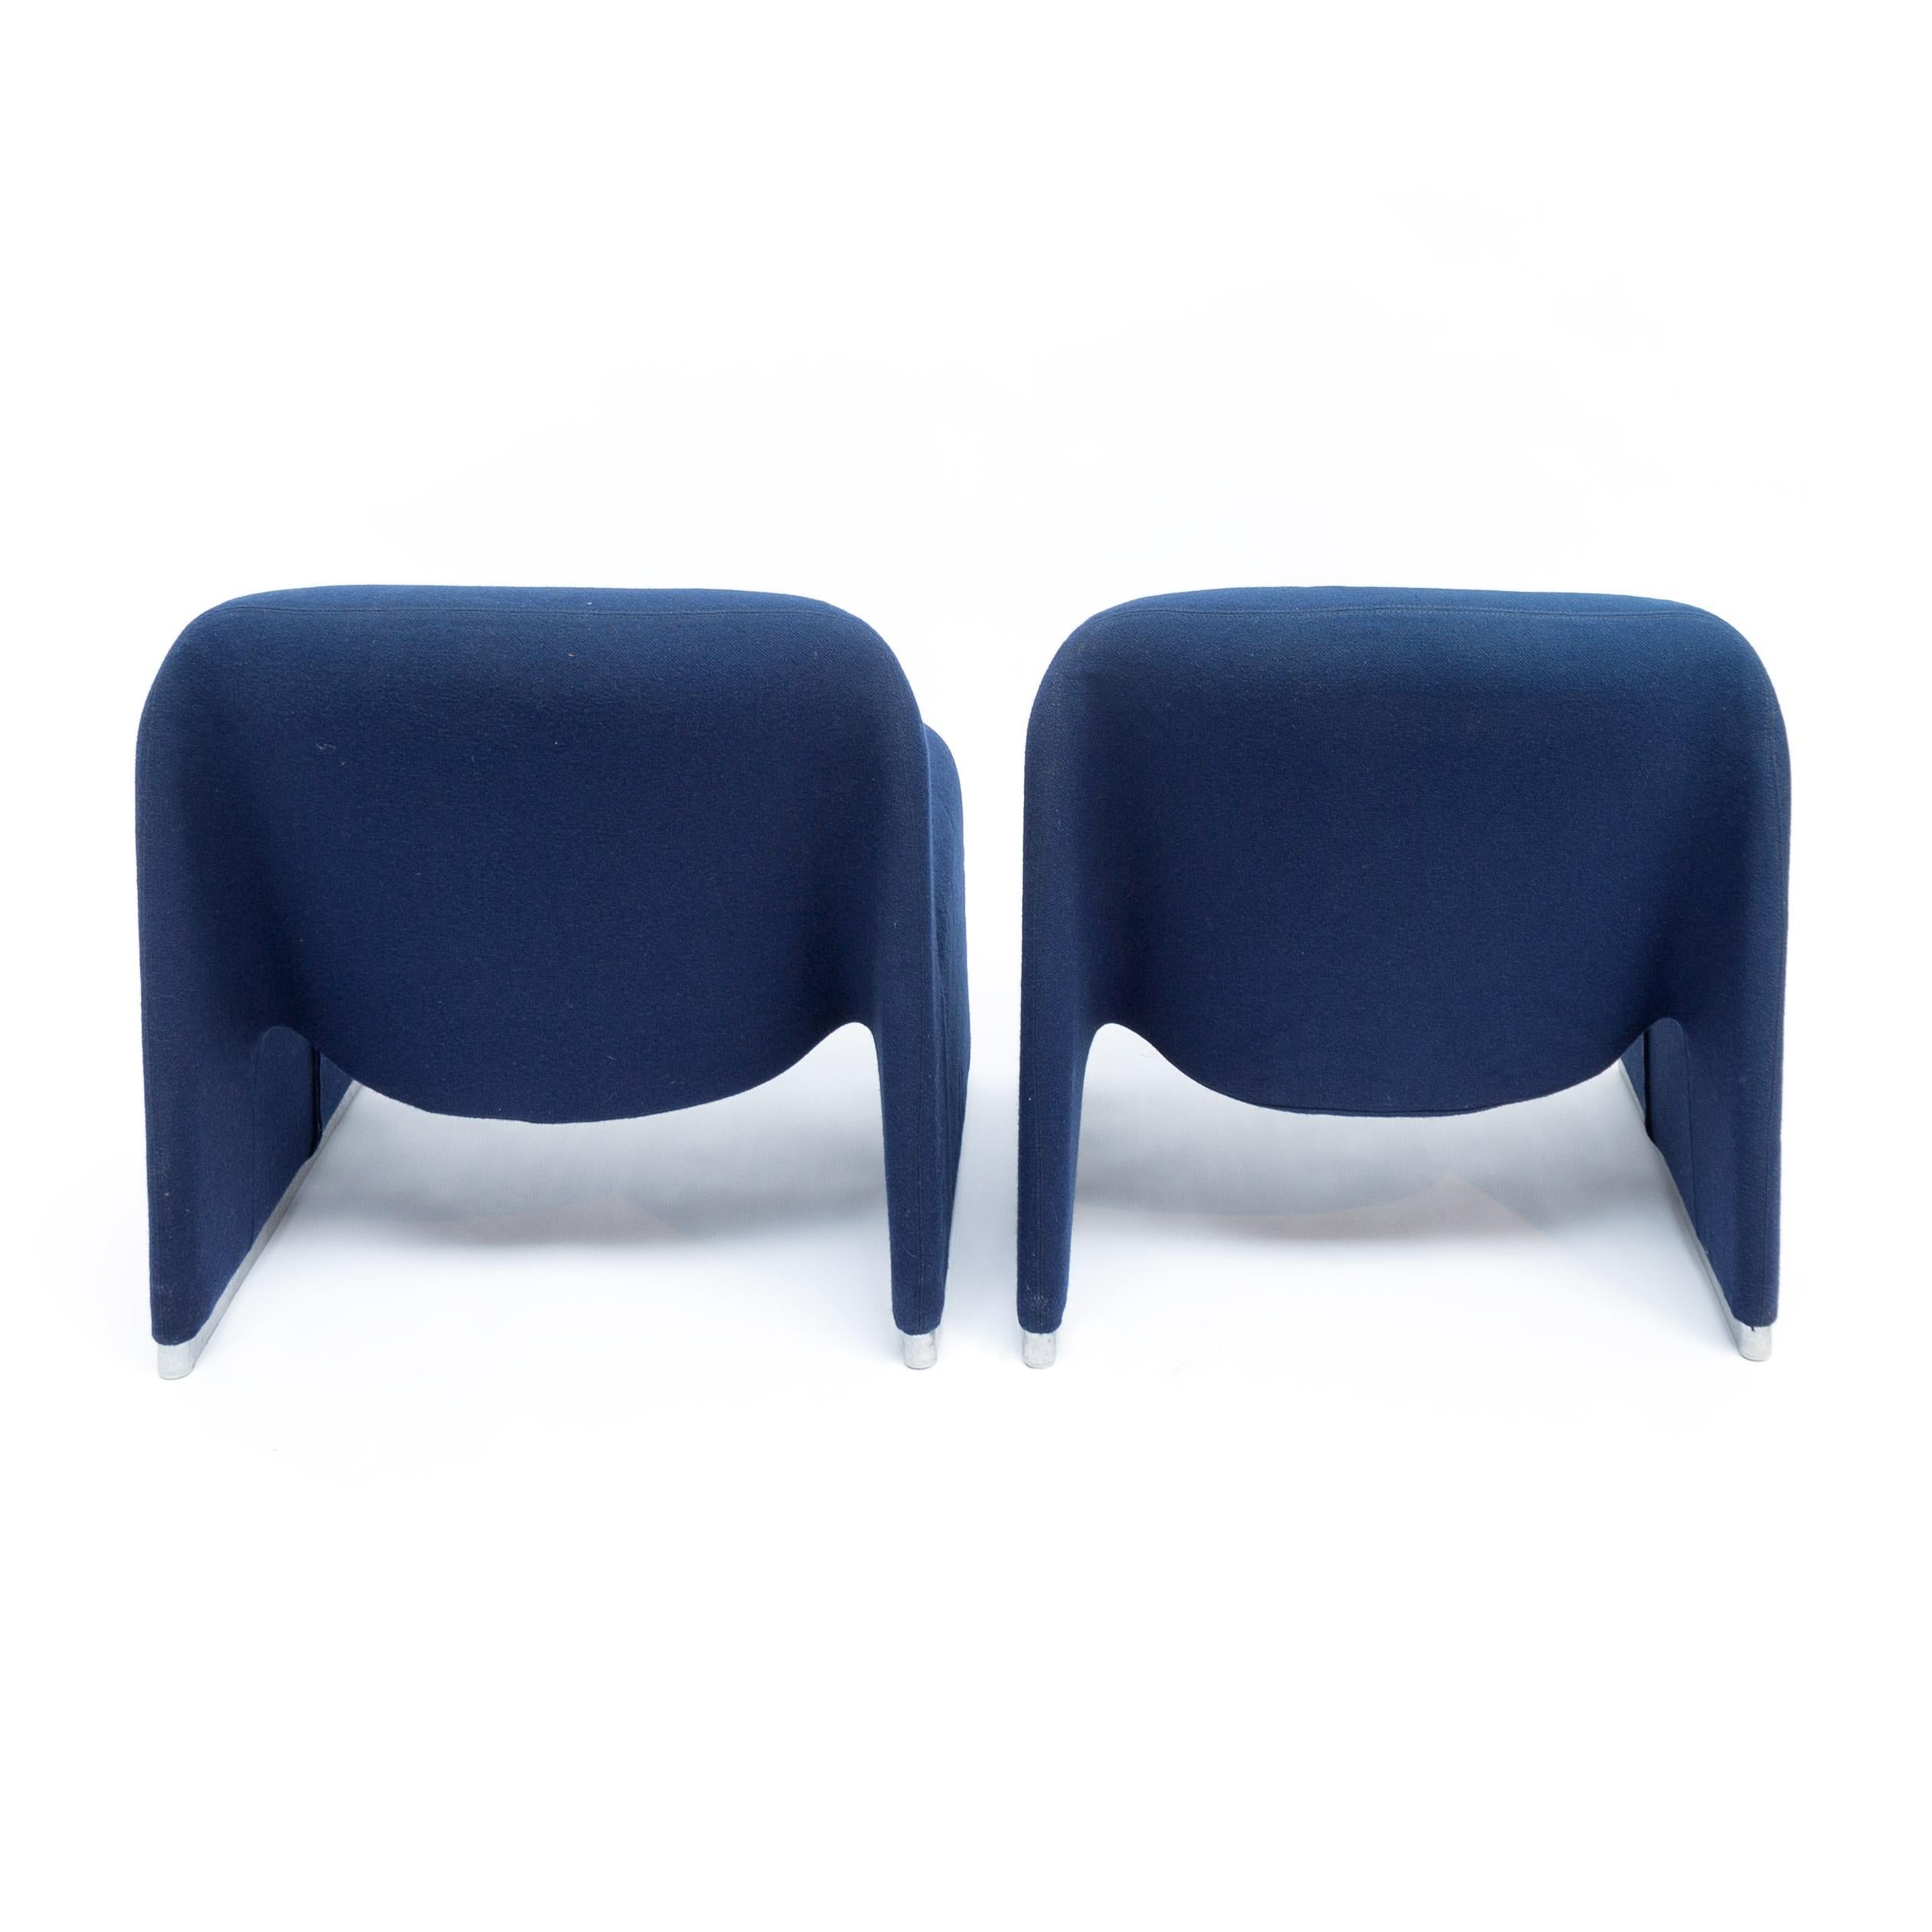 Mid-Century Modern Alky Chair Blue Designed by Giancarlo Piretti for Castelli, Italy, 1970s